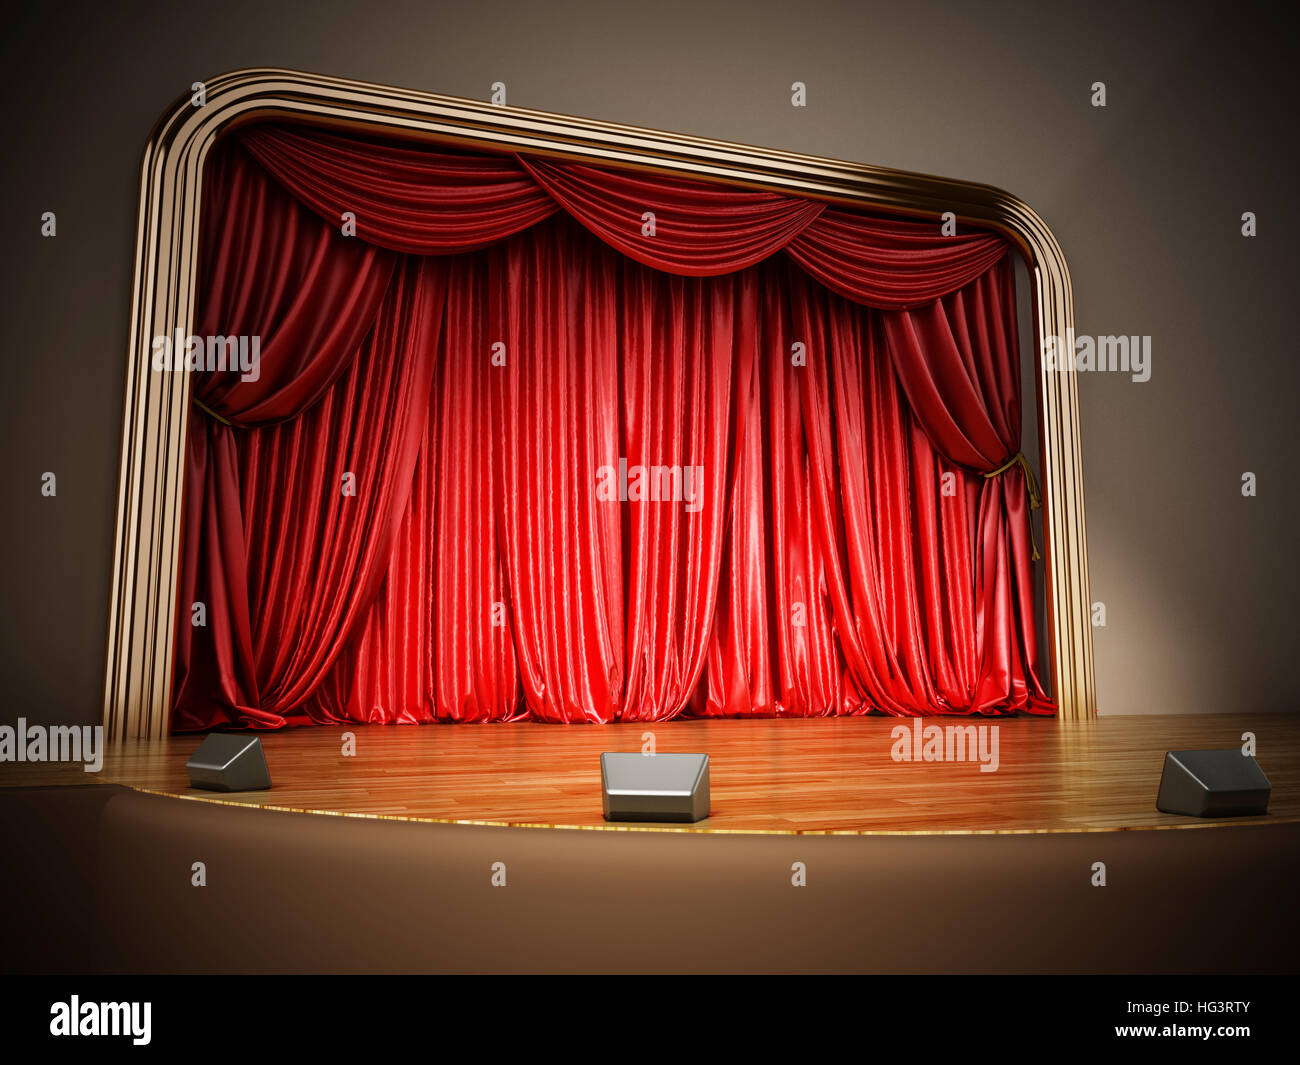 Red Curtains Stage High Resolution Stock Photography and Images - Alamy